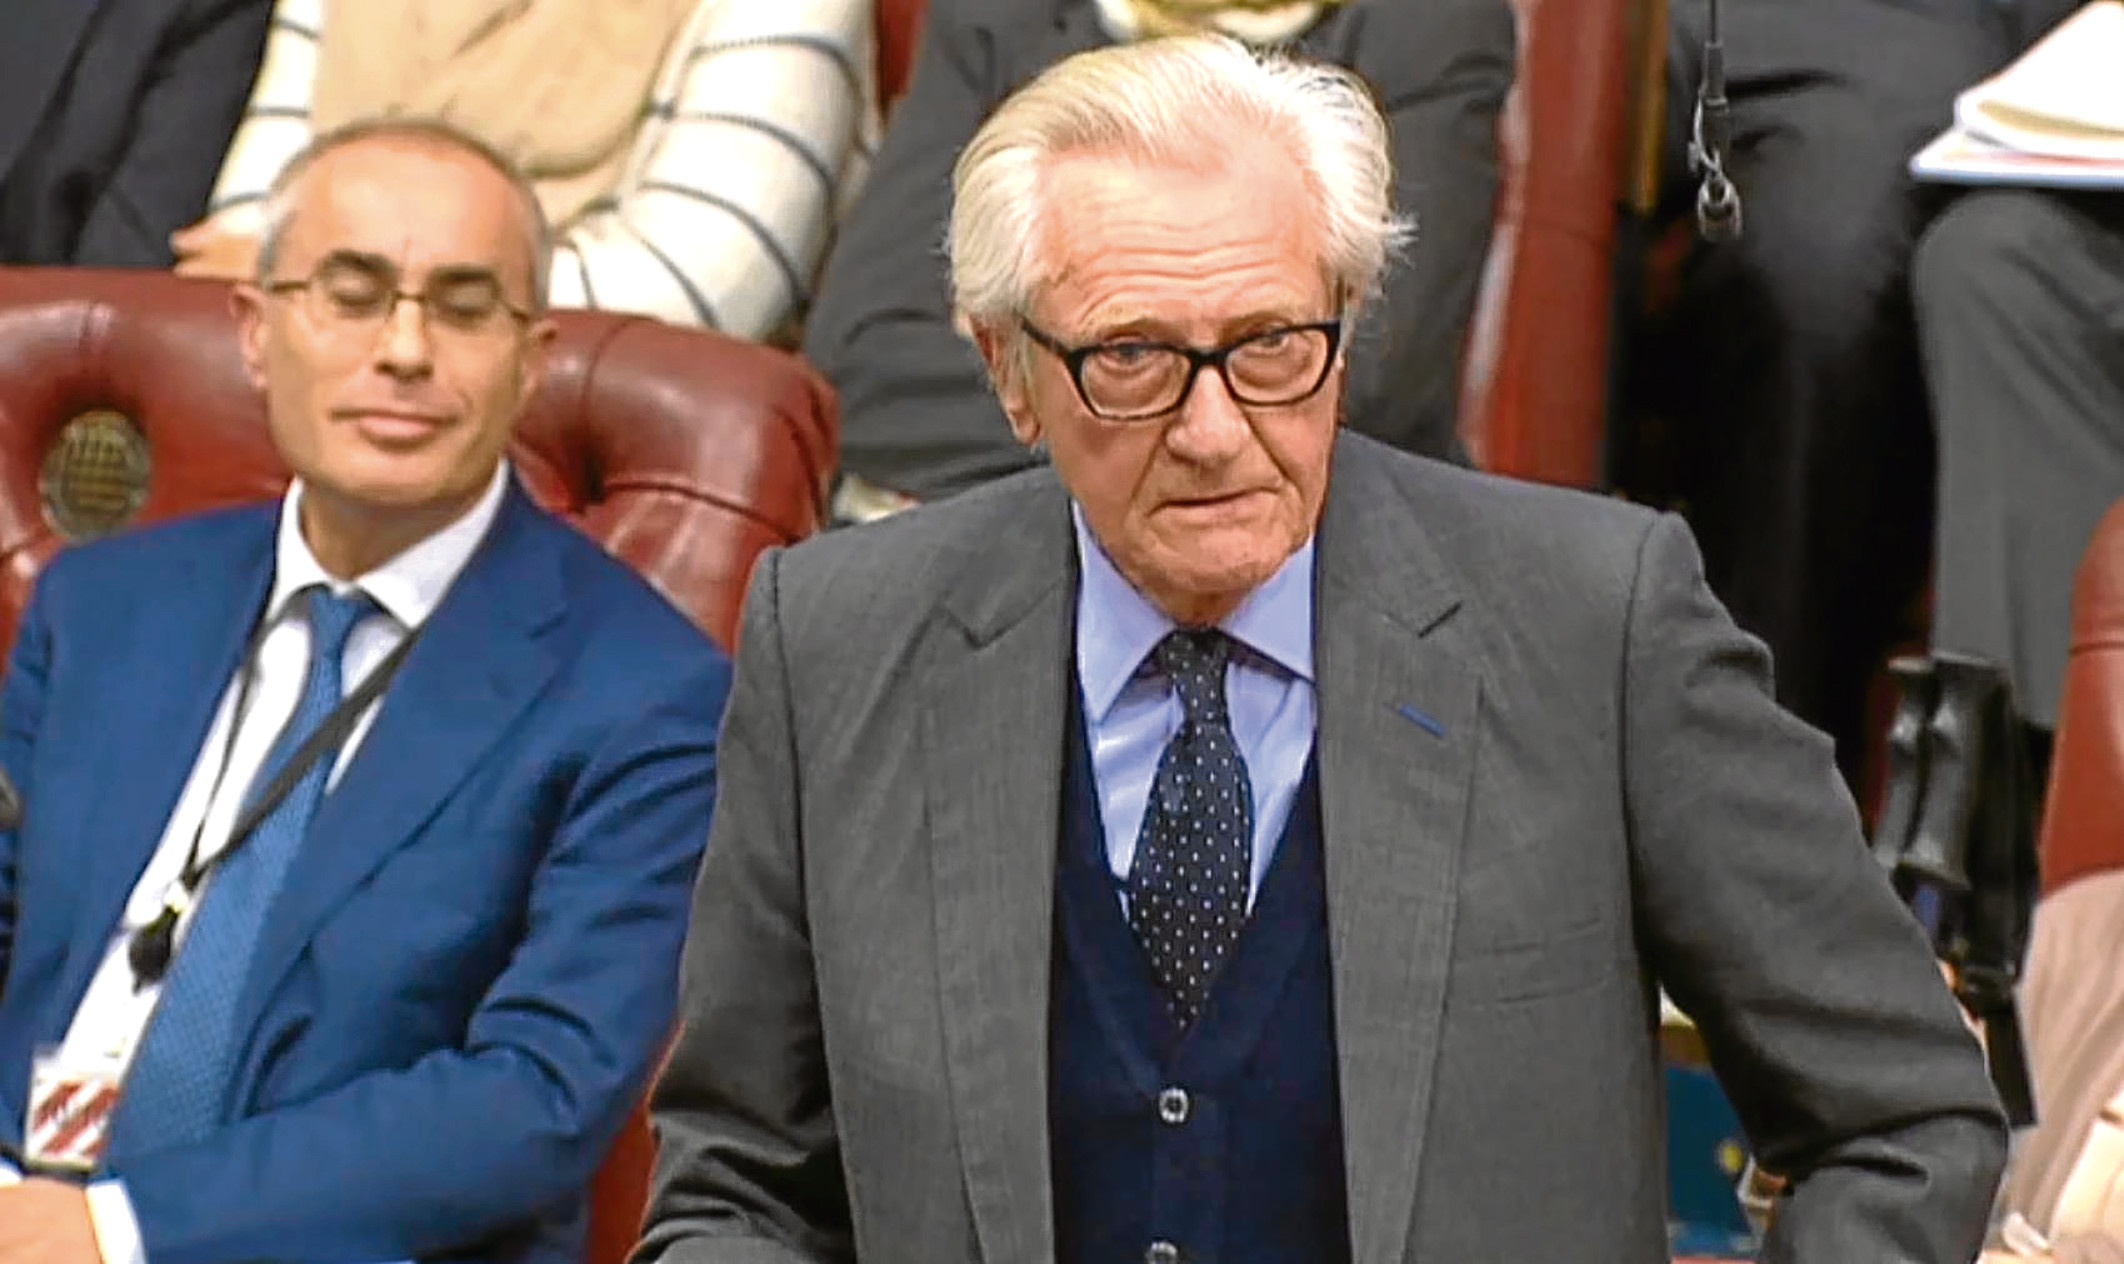 Lord Heseltine speaks in the House of Lords.